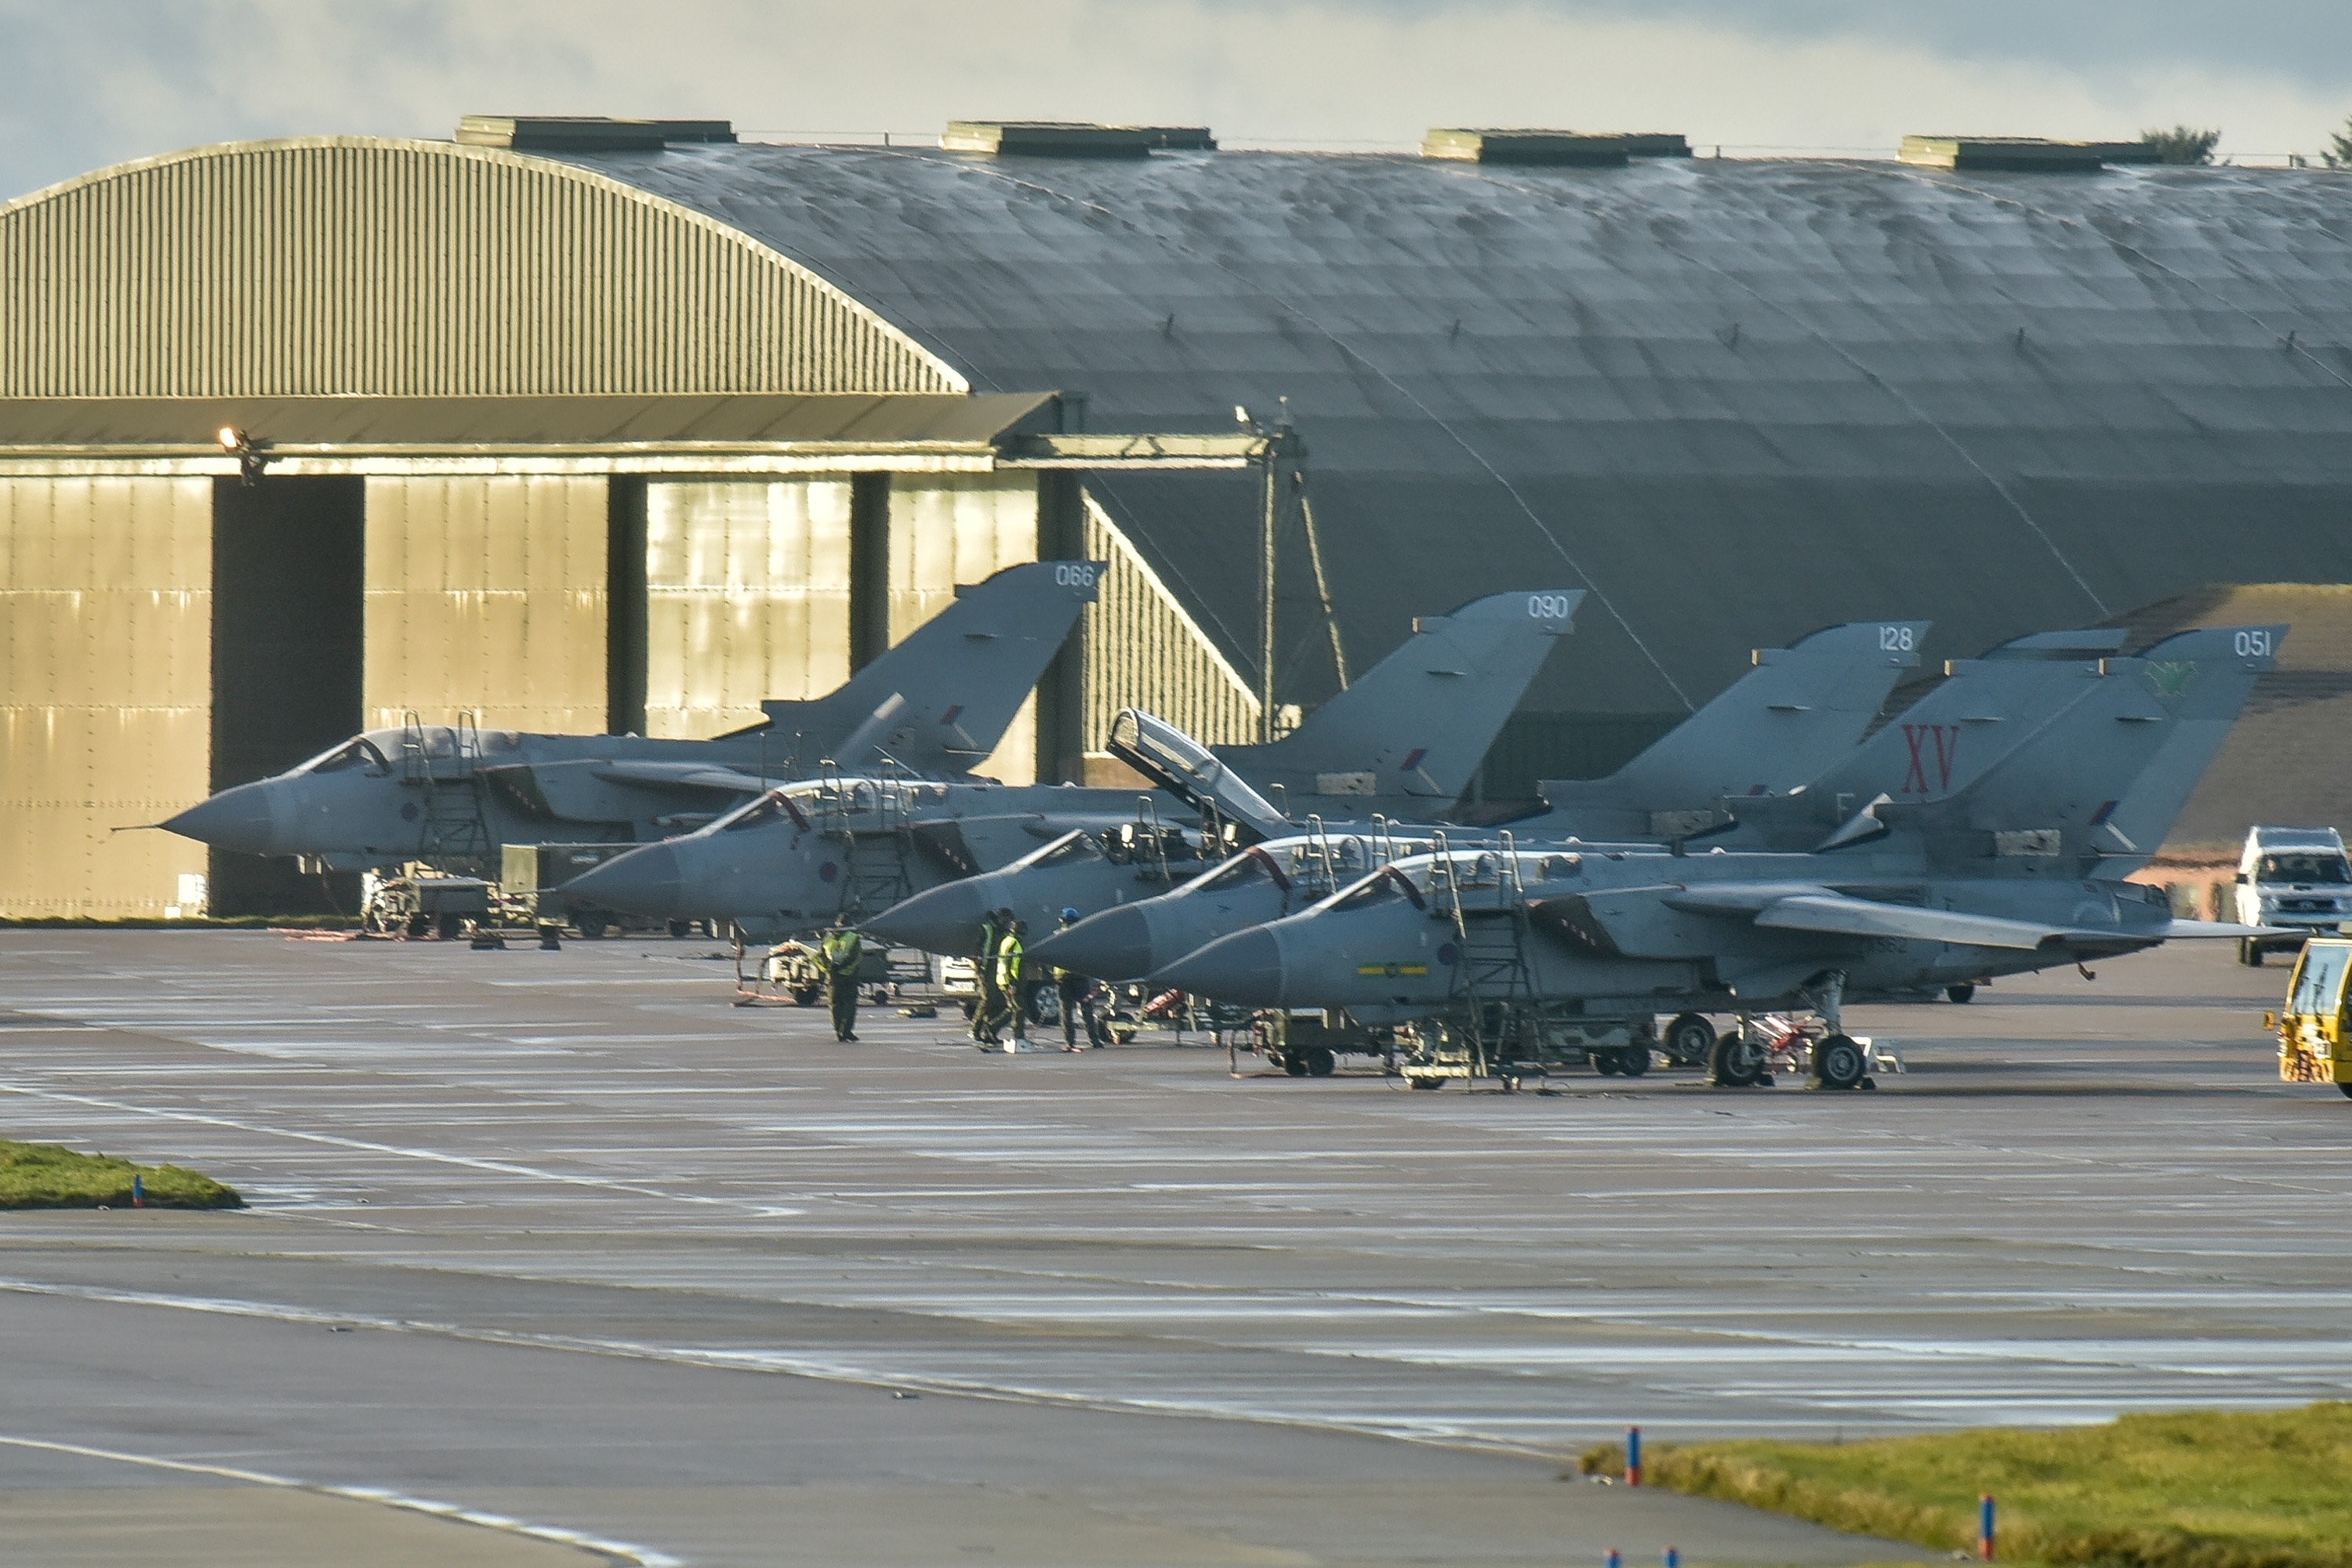 RAF Tornado GR4s are seen parked at RAF Lossiemouth, in Lossiemouth, Moray on December 02 2015. December 02 2015. On the day MPs debate and vote whether to send RAF planes to Syria to bomb Islamic State targets.